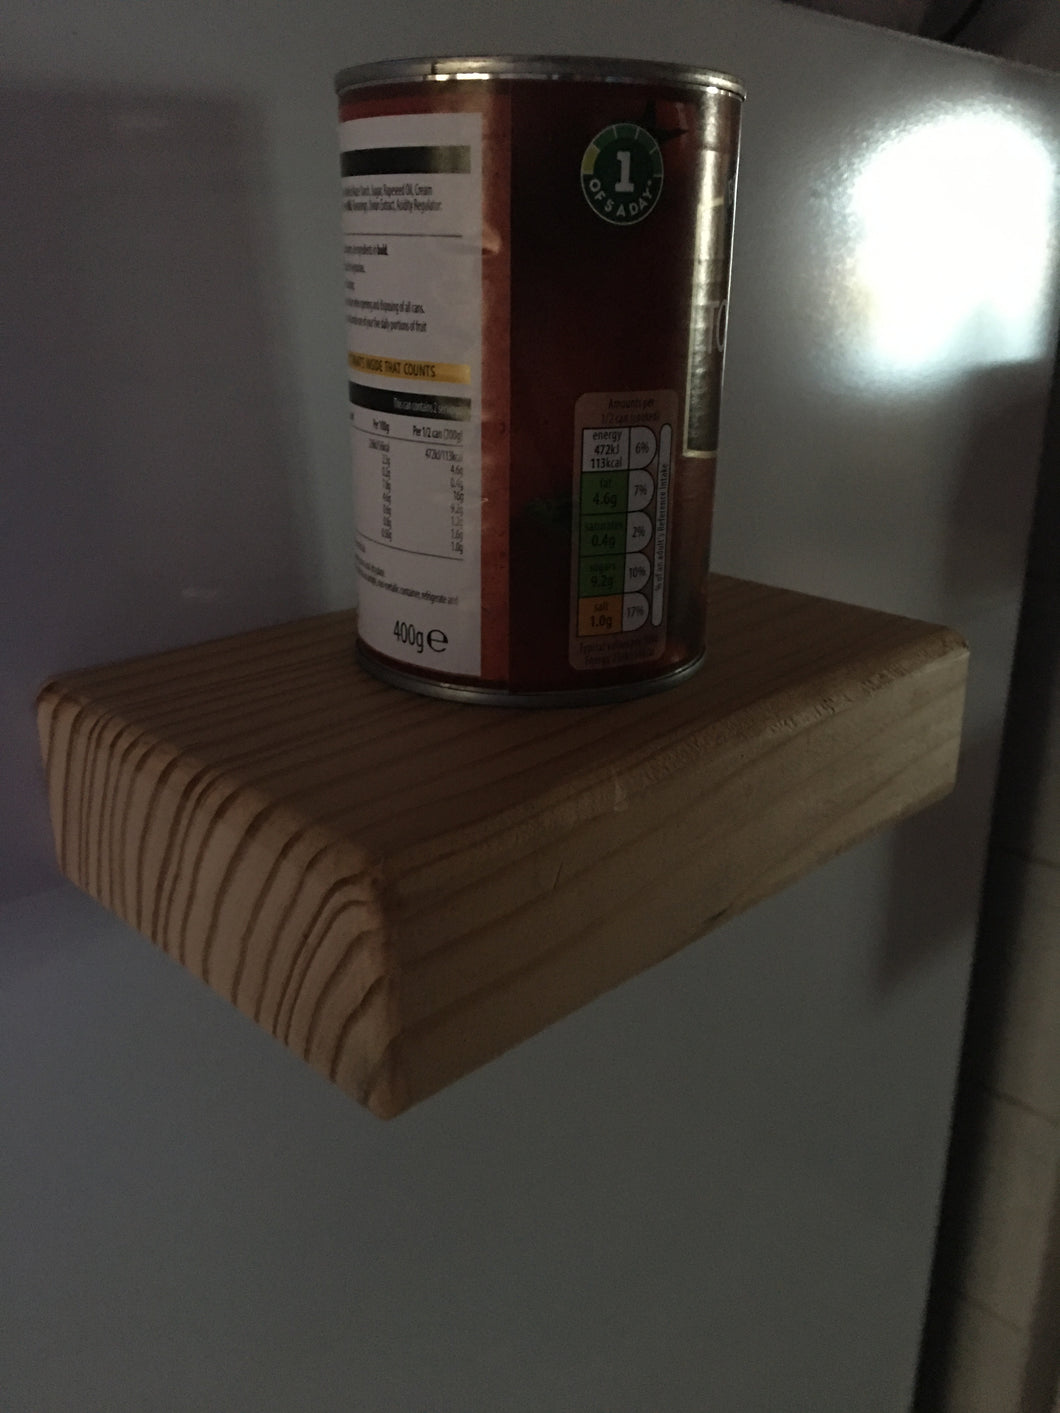 Chunky fridge magnet shelf made from one piece of wood. Untreated. 7516 9623